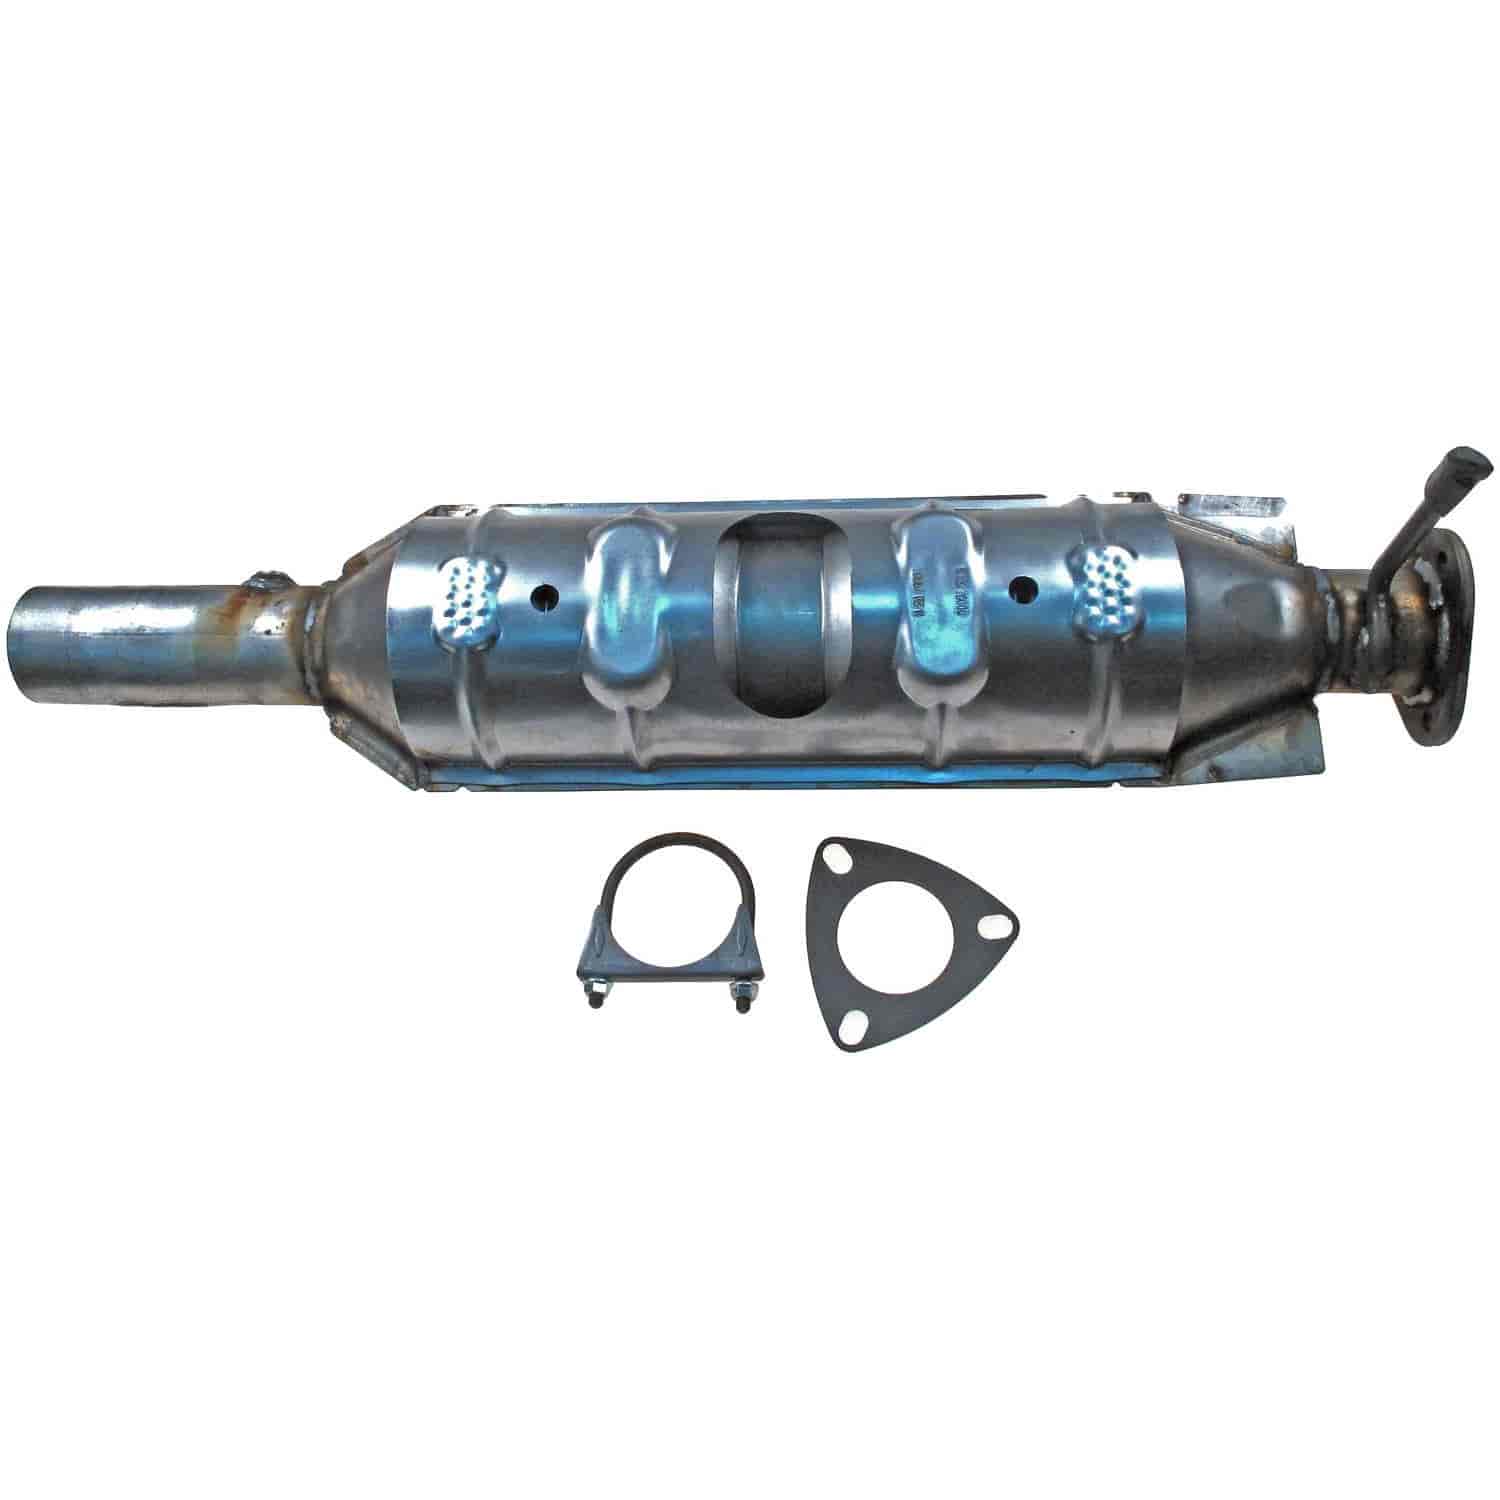 Catalyic Converters With Pipe Included